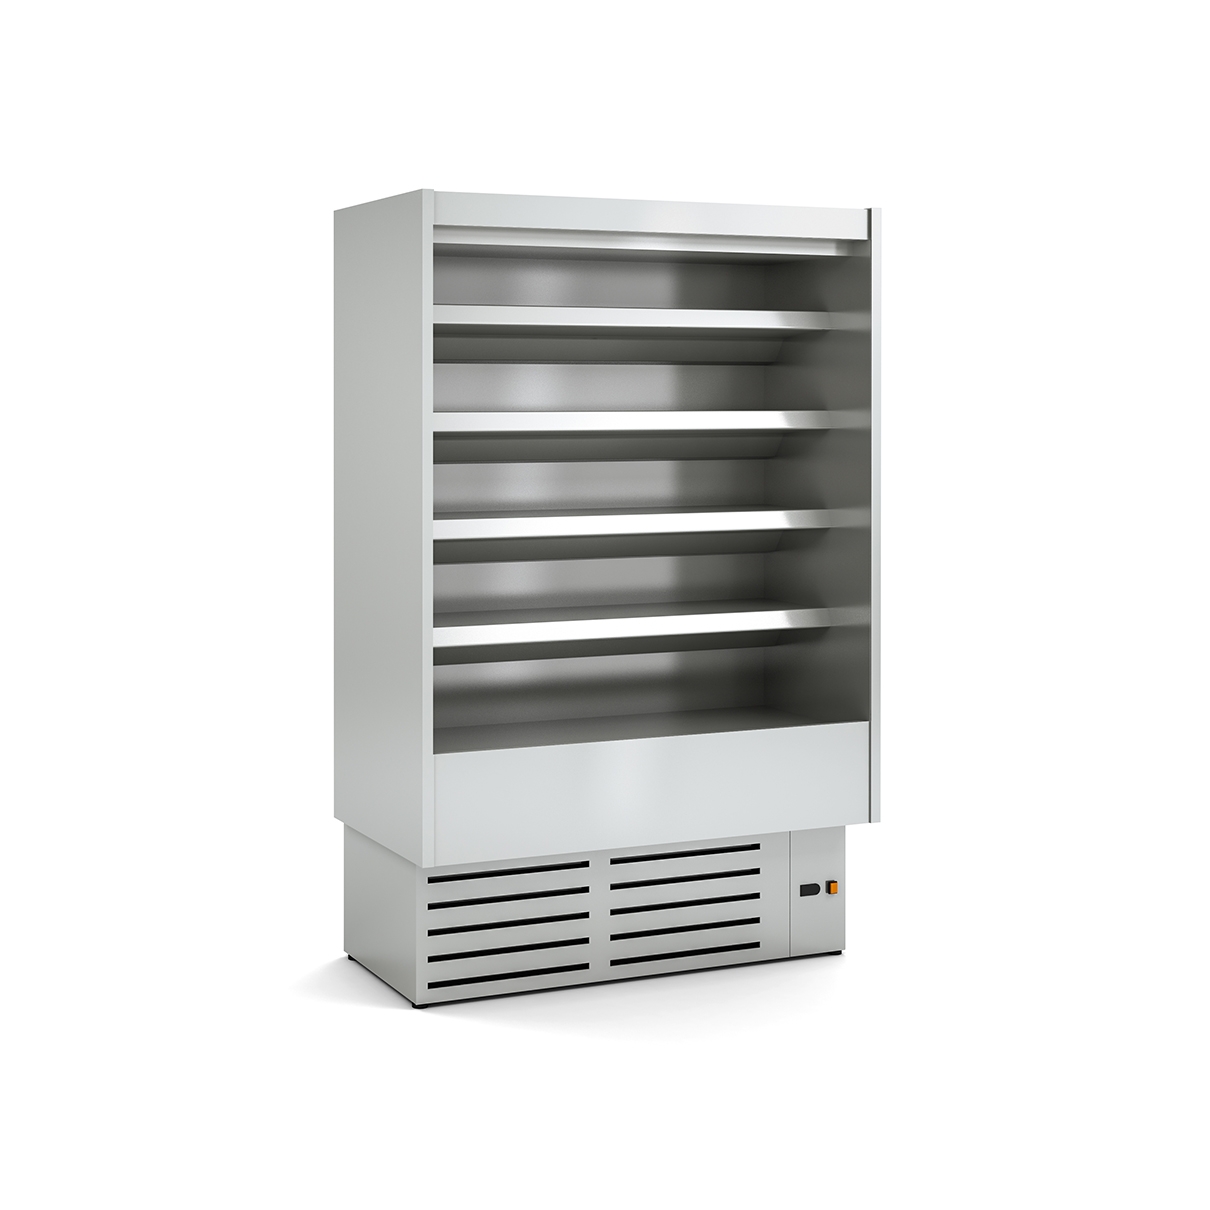 copy of REFRIGERATED WALL CABINET DS1 I M1-M2